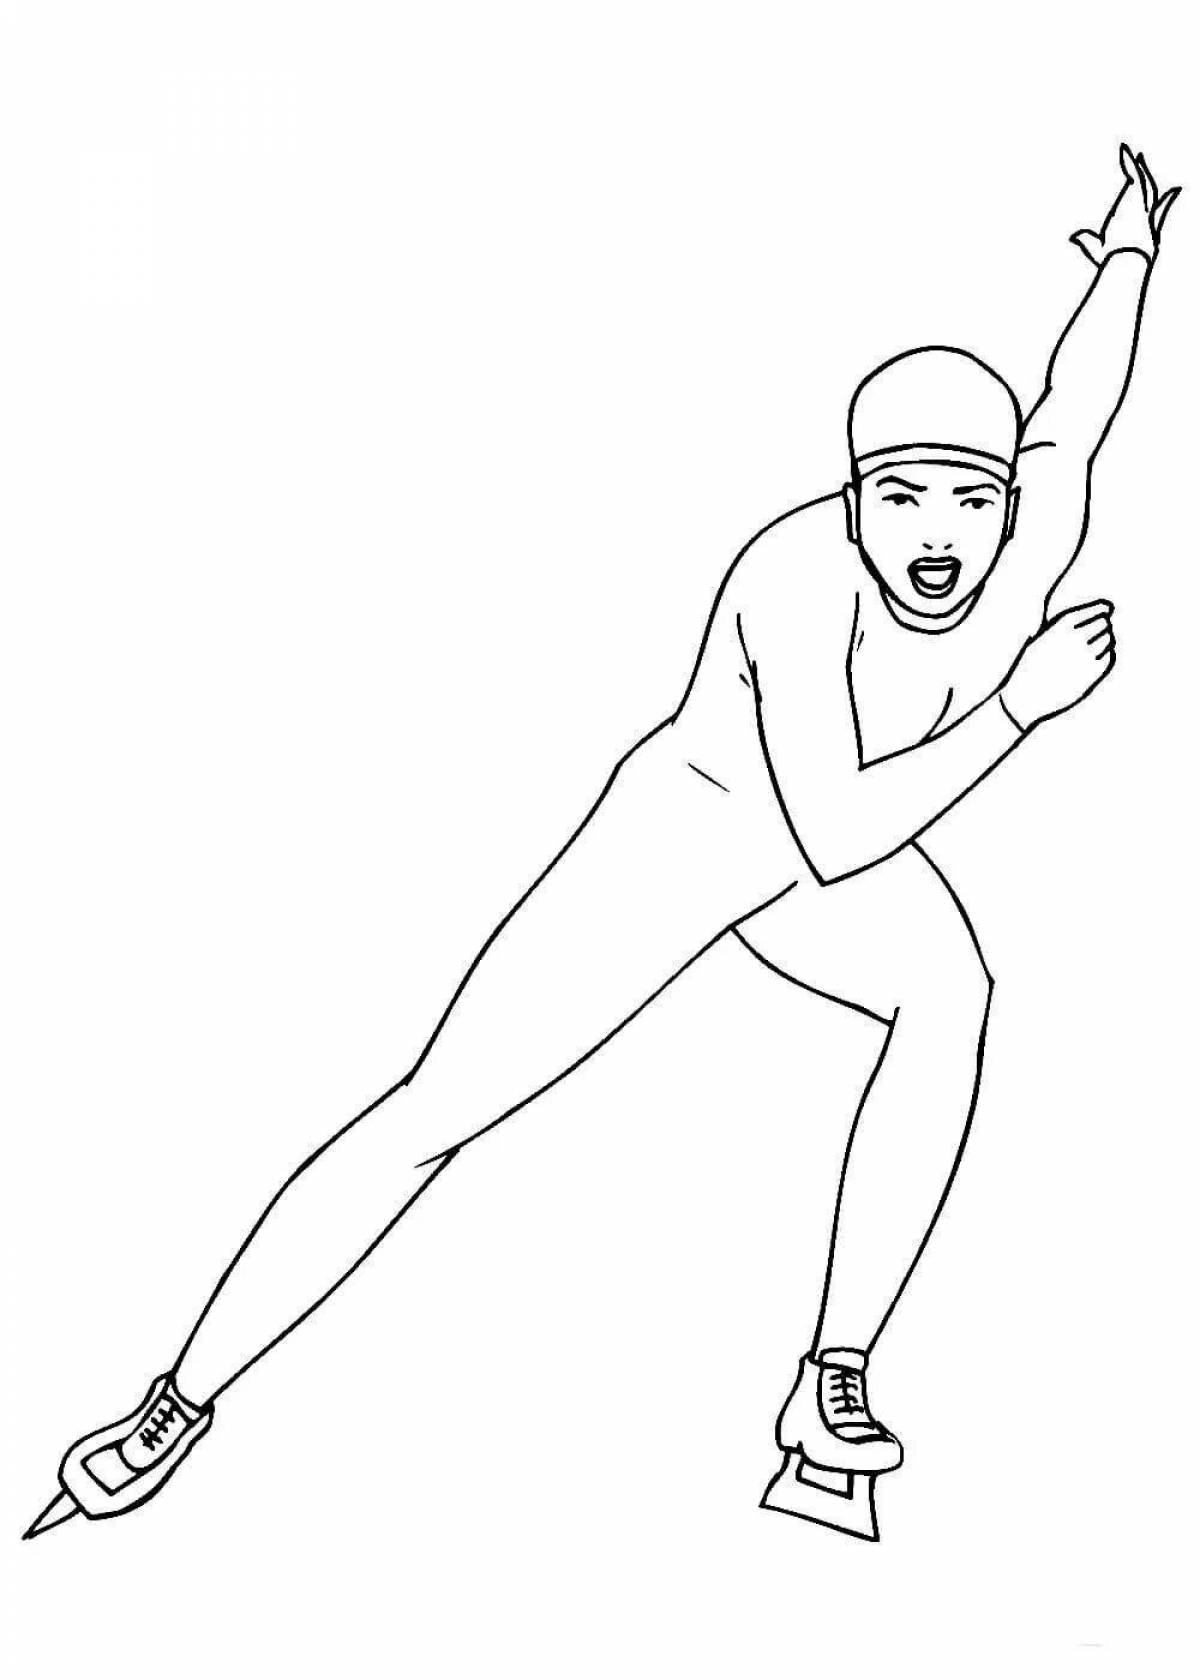 A fun coloring book for kids in speed skating